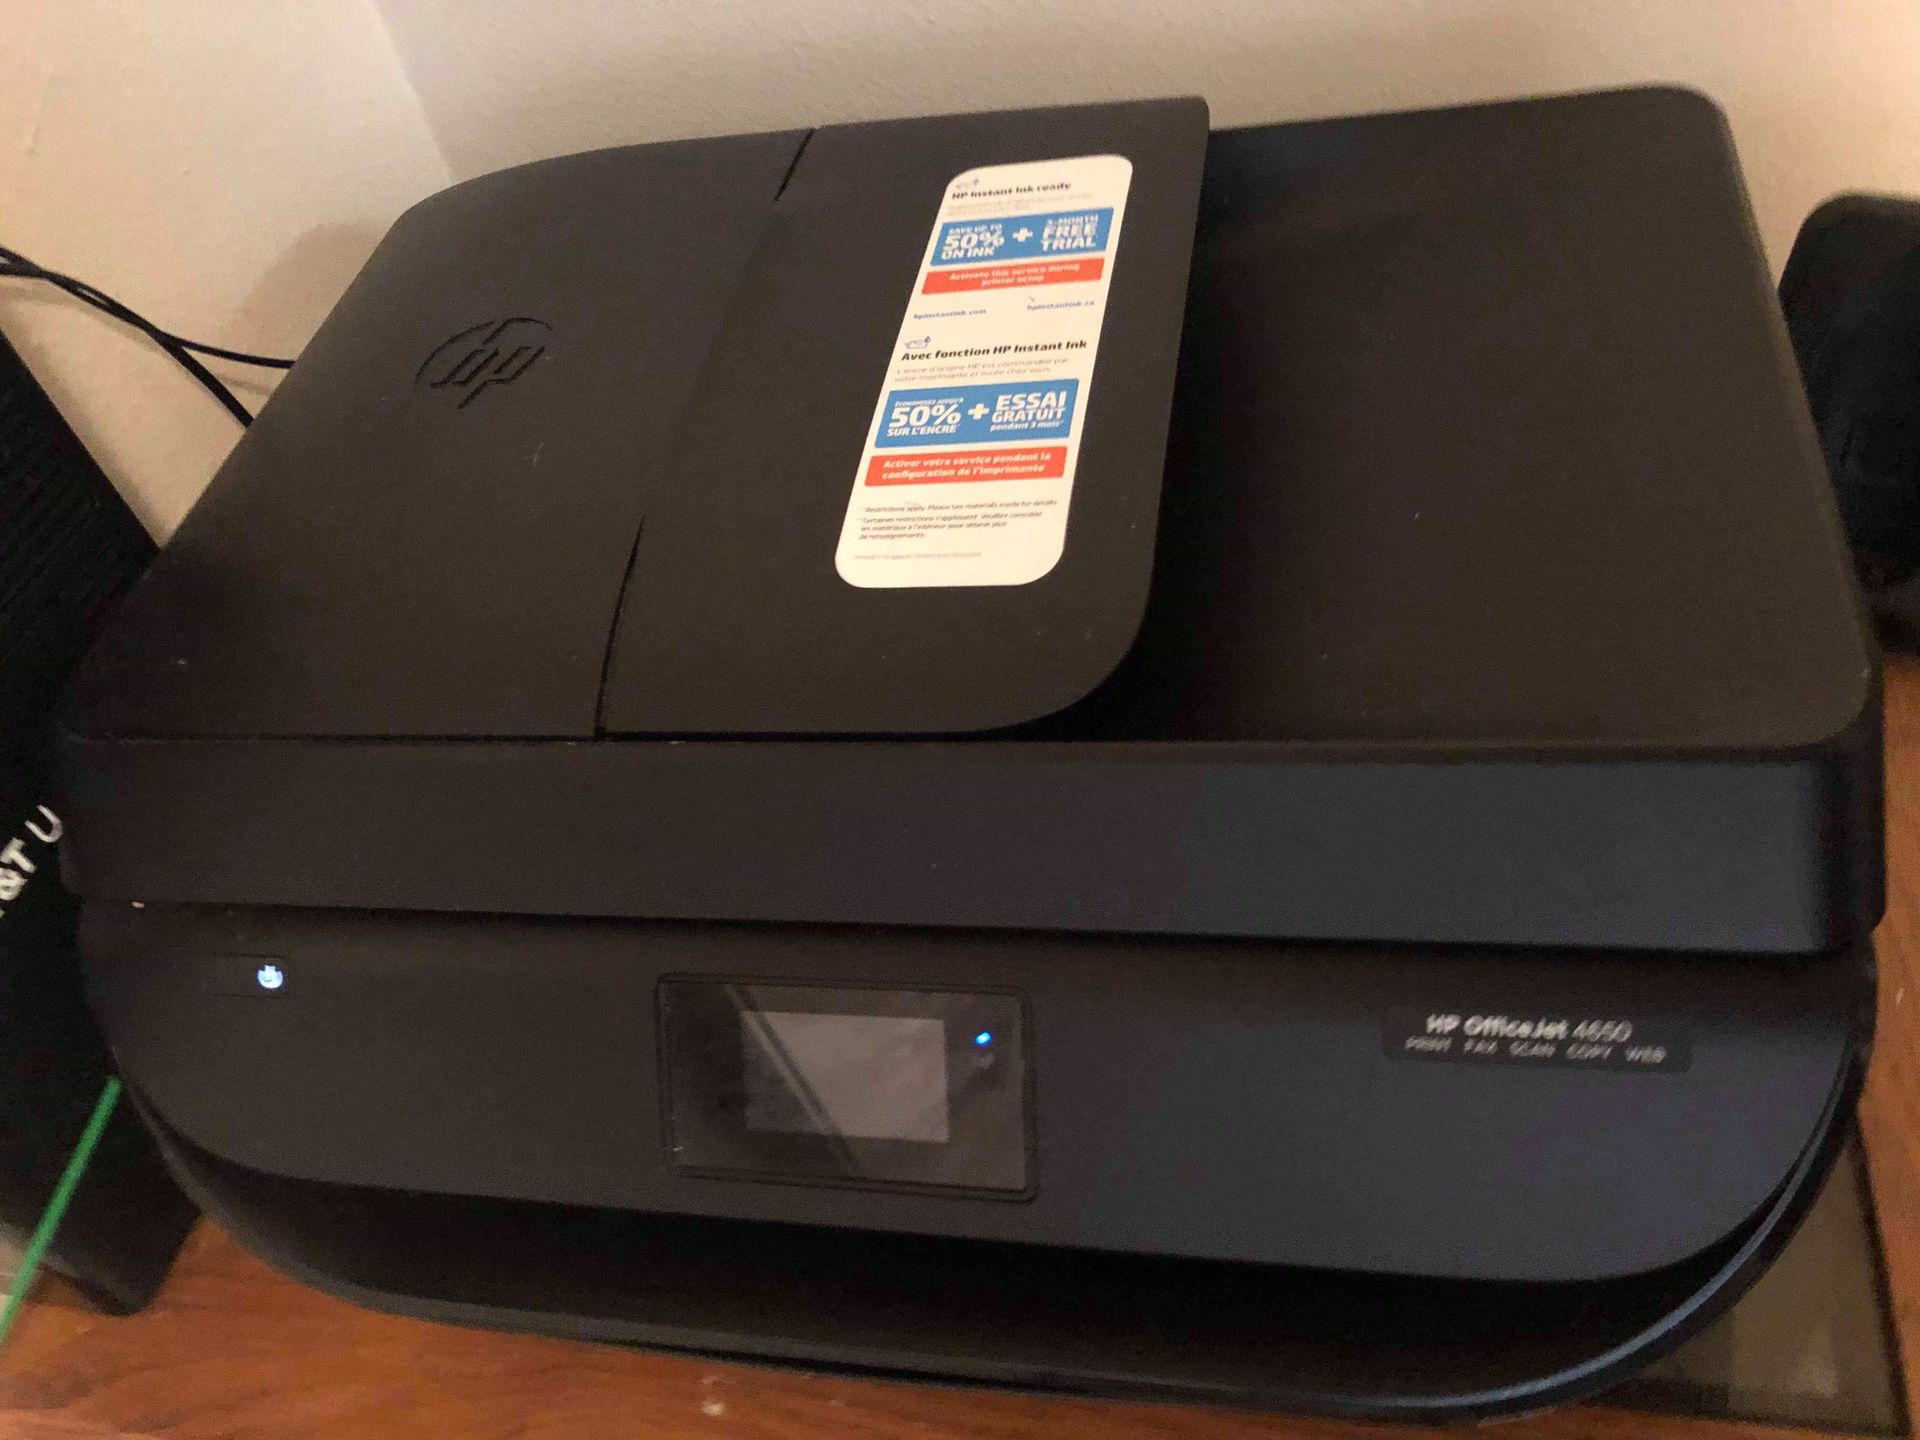 HP Office 4650 Jet Print Fax Scan and Copy